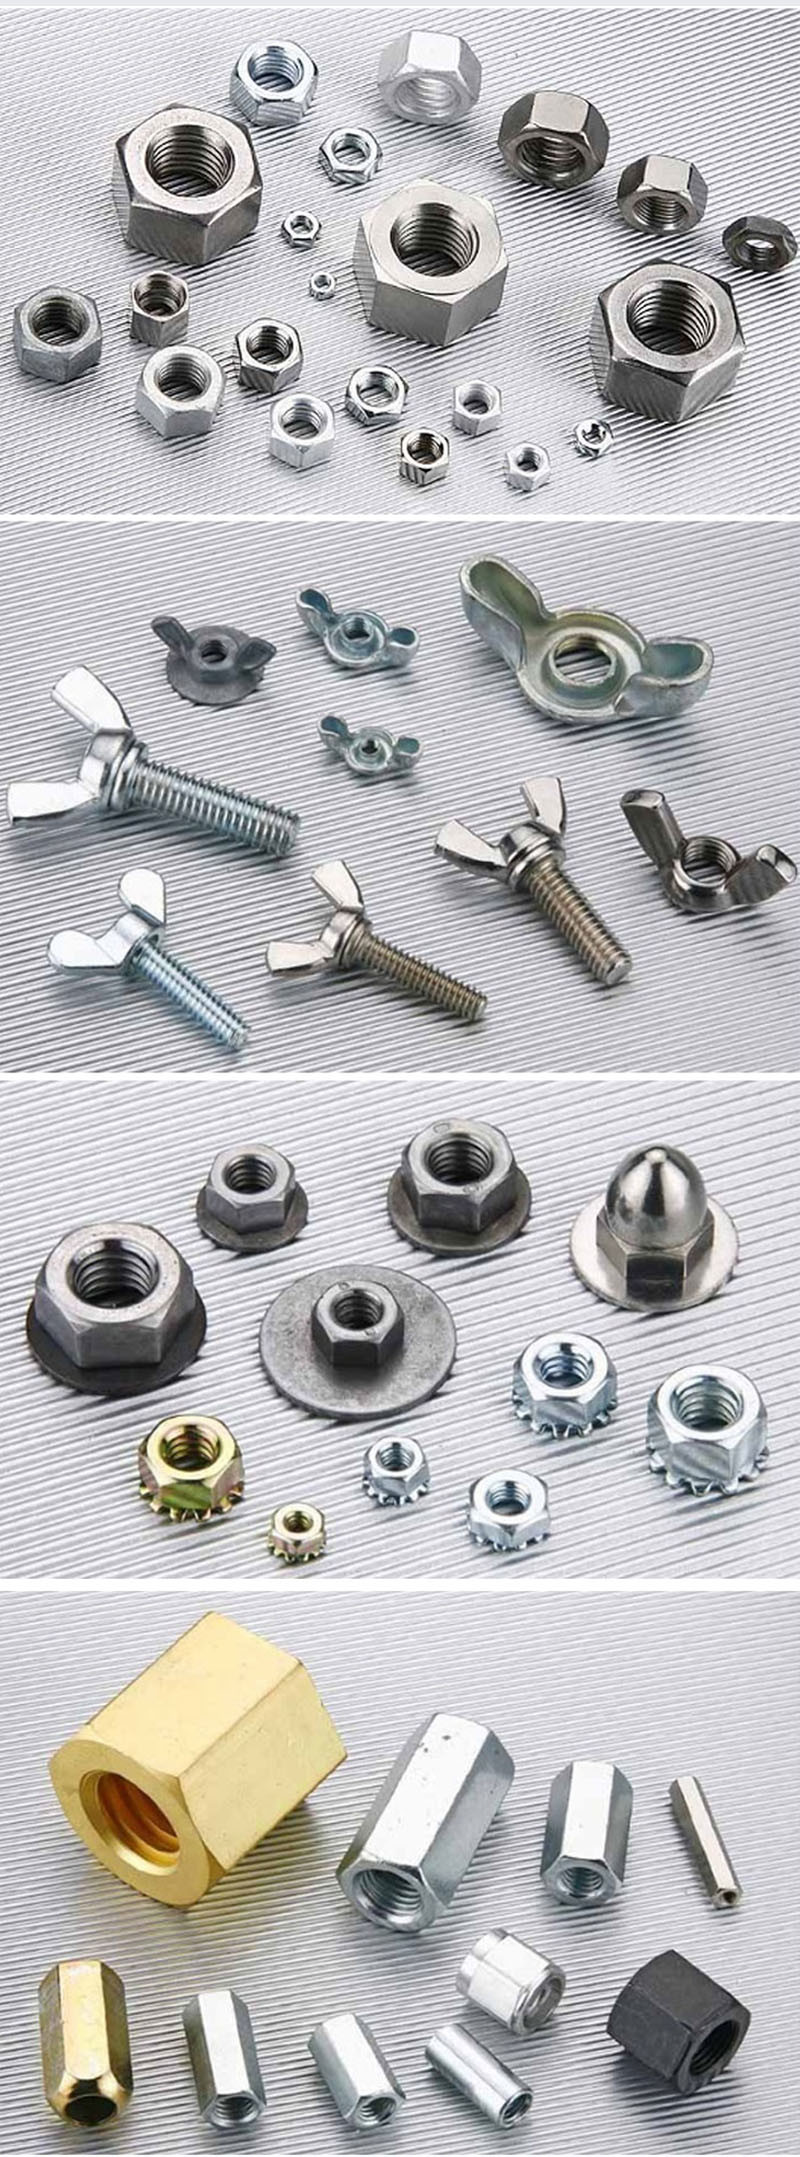 Self Tapping Screws with Cross Recessed Pan Head